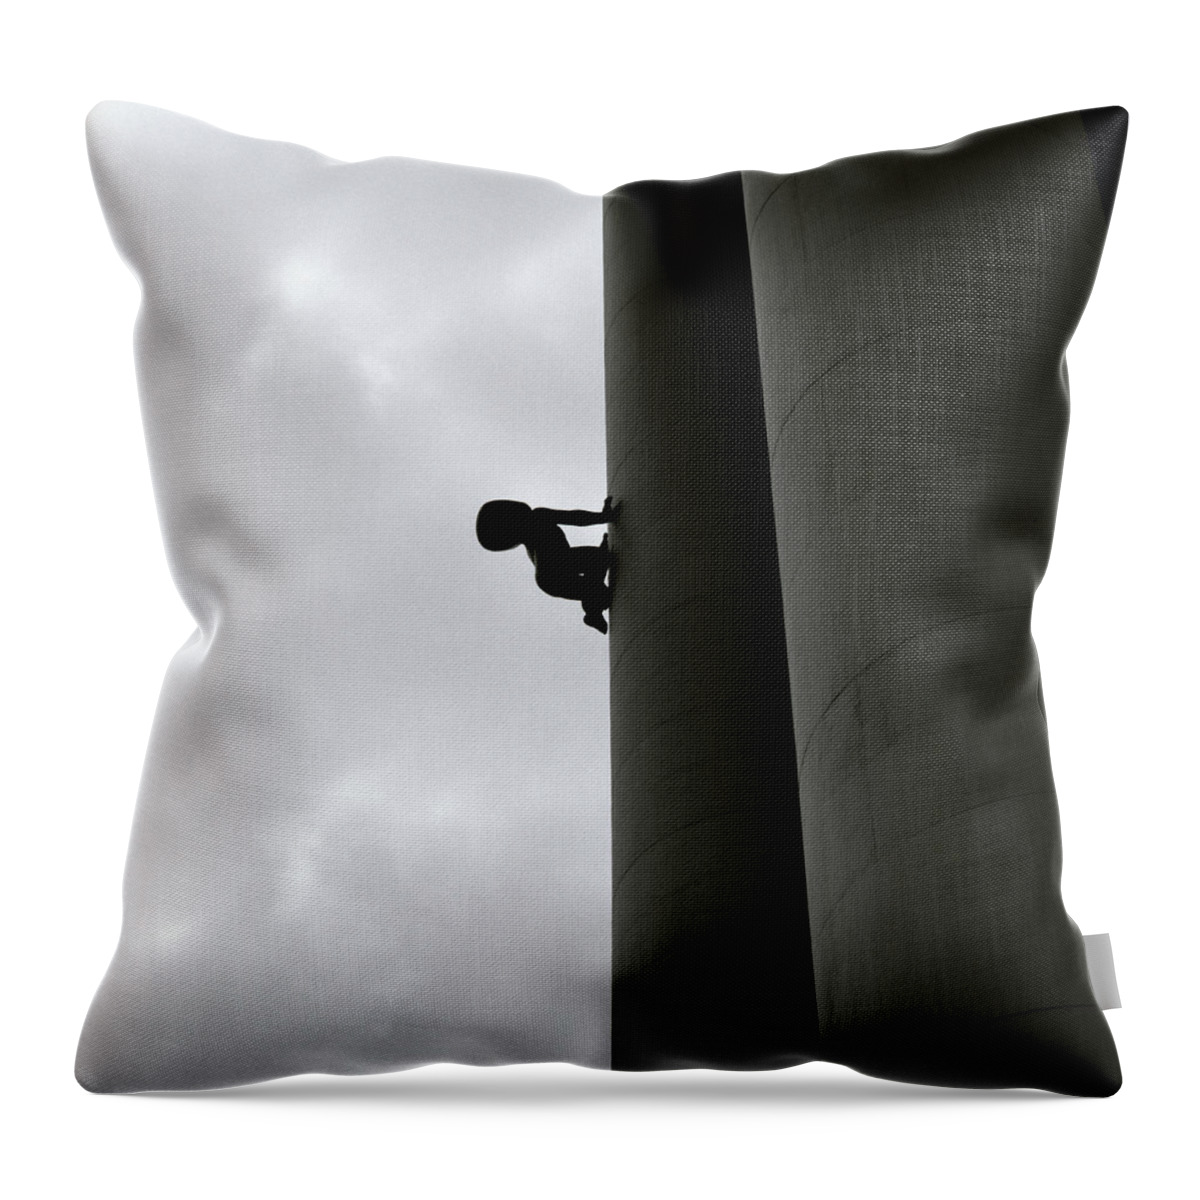 Surrealism Throw Pillow featuring the photograph Surrealism by Shaun Higson